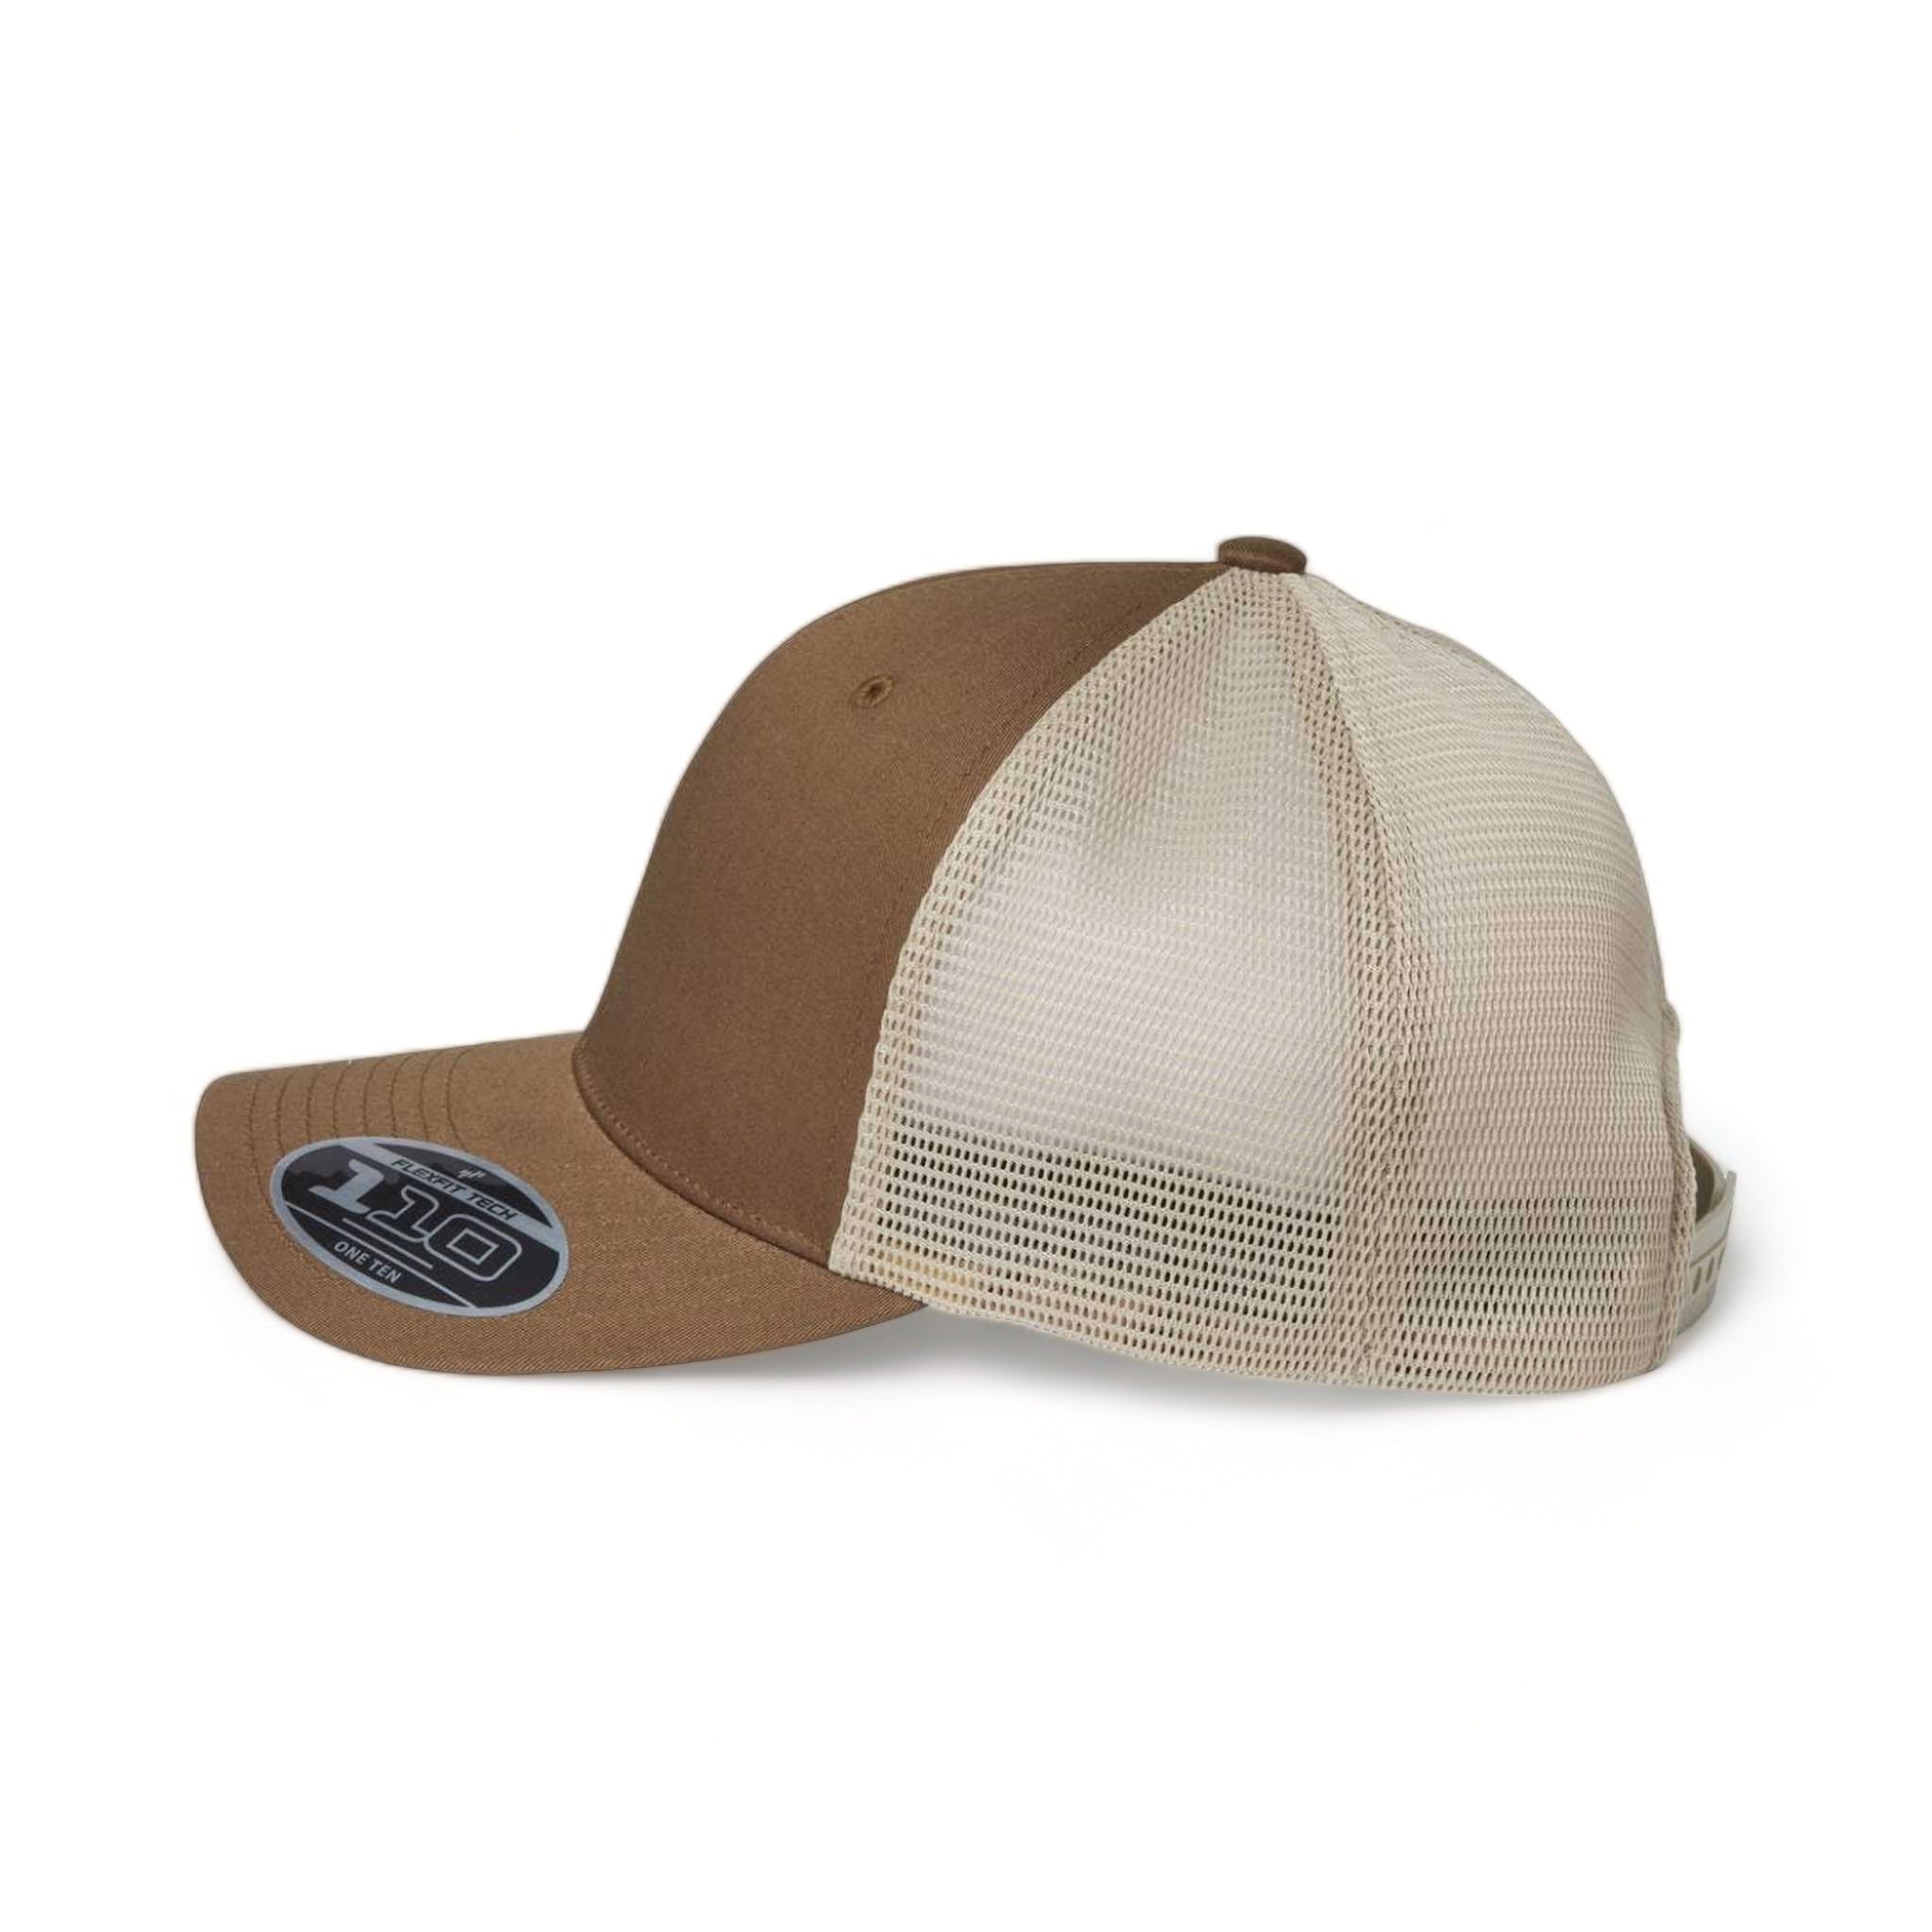 Side view of Flexfit 110M custom hat in coyote brown and khaki